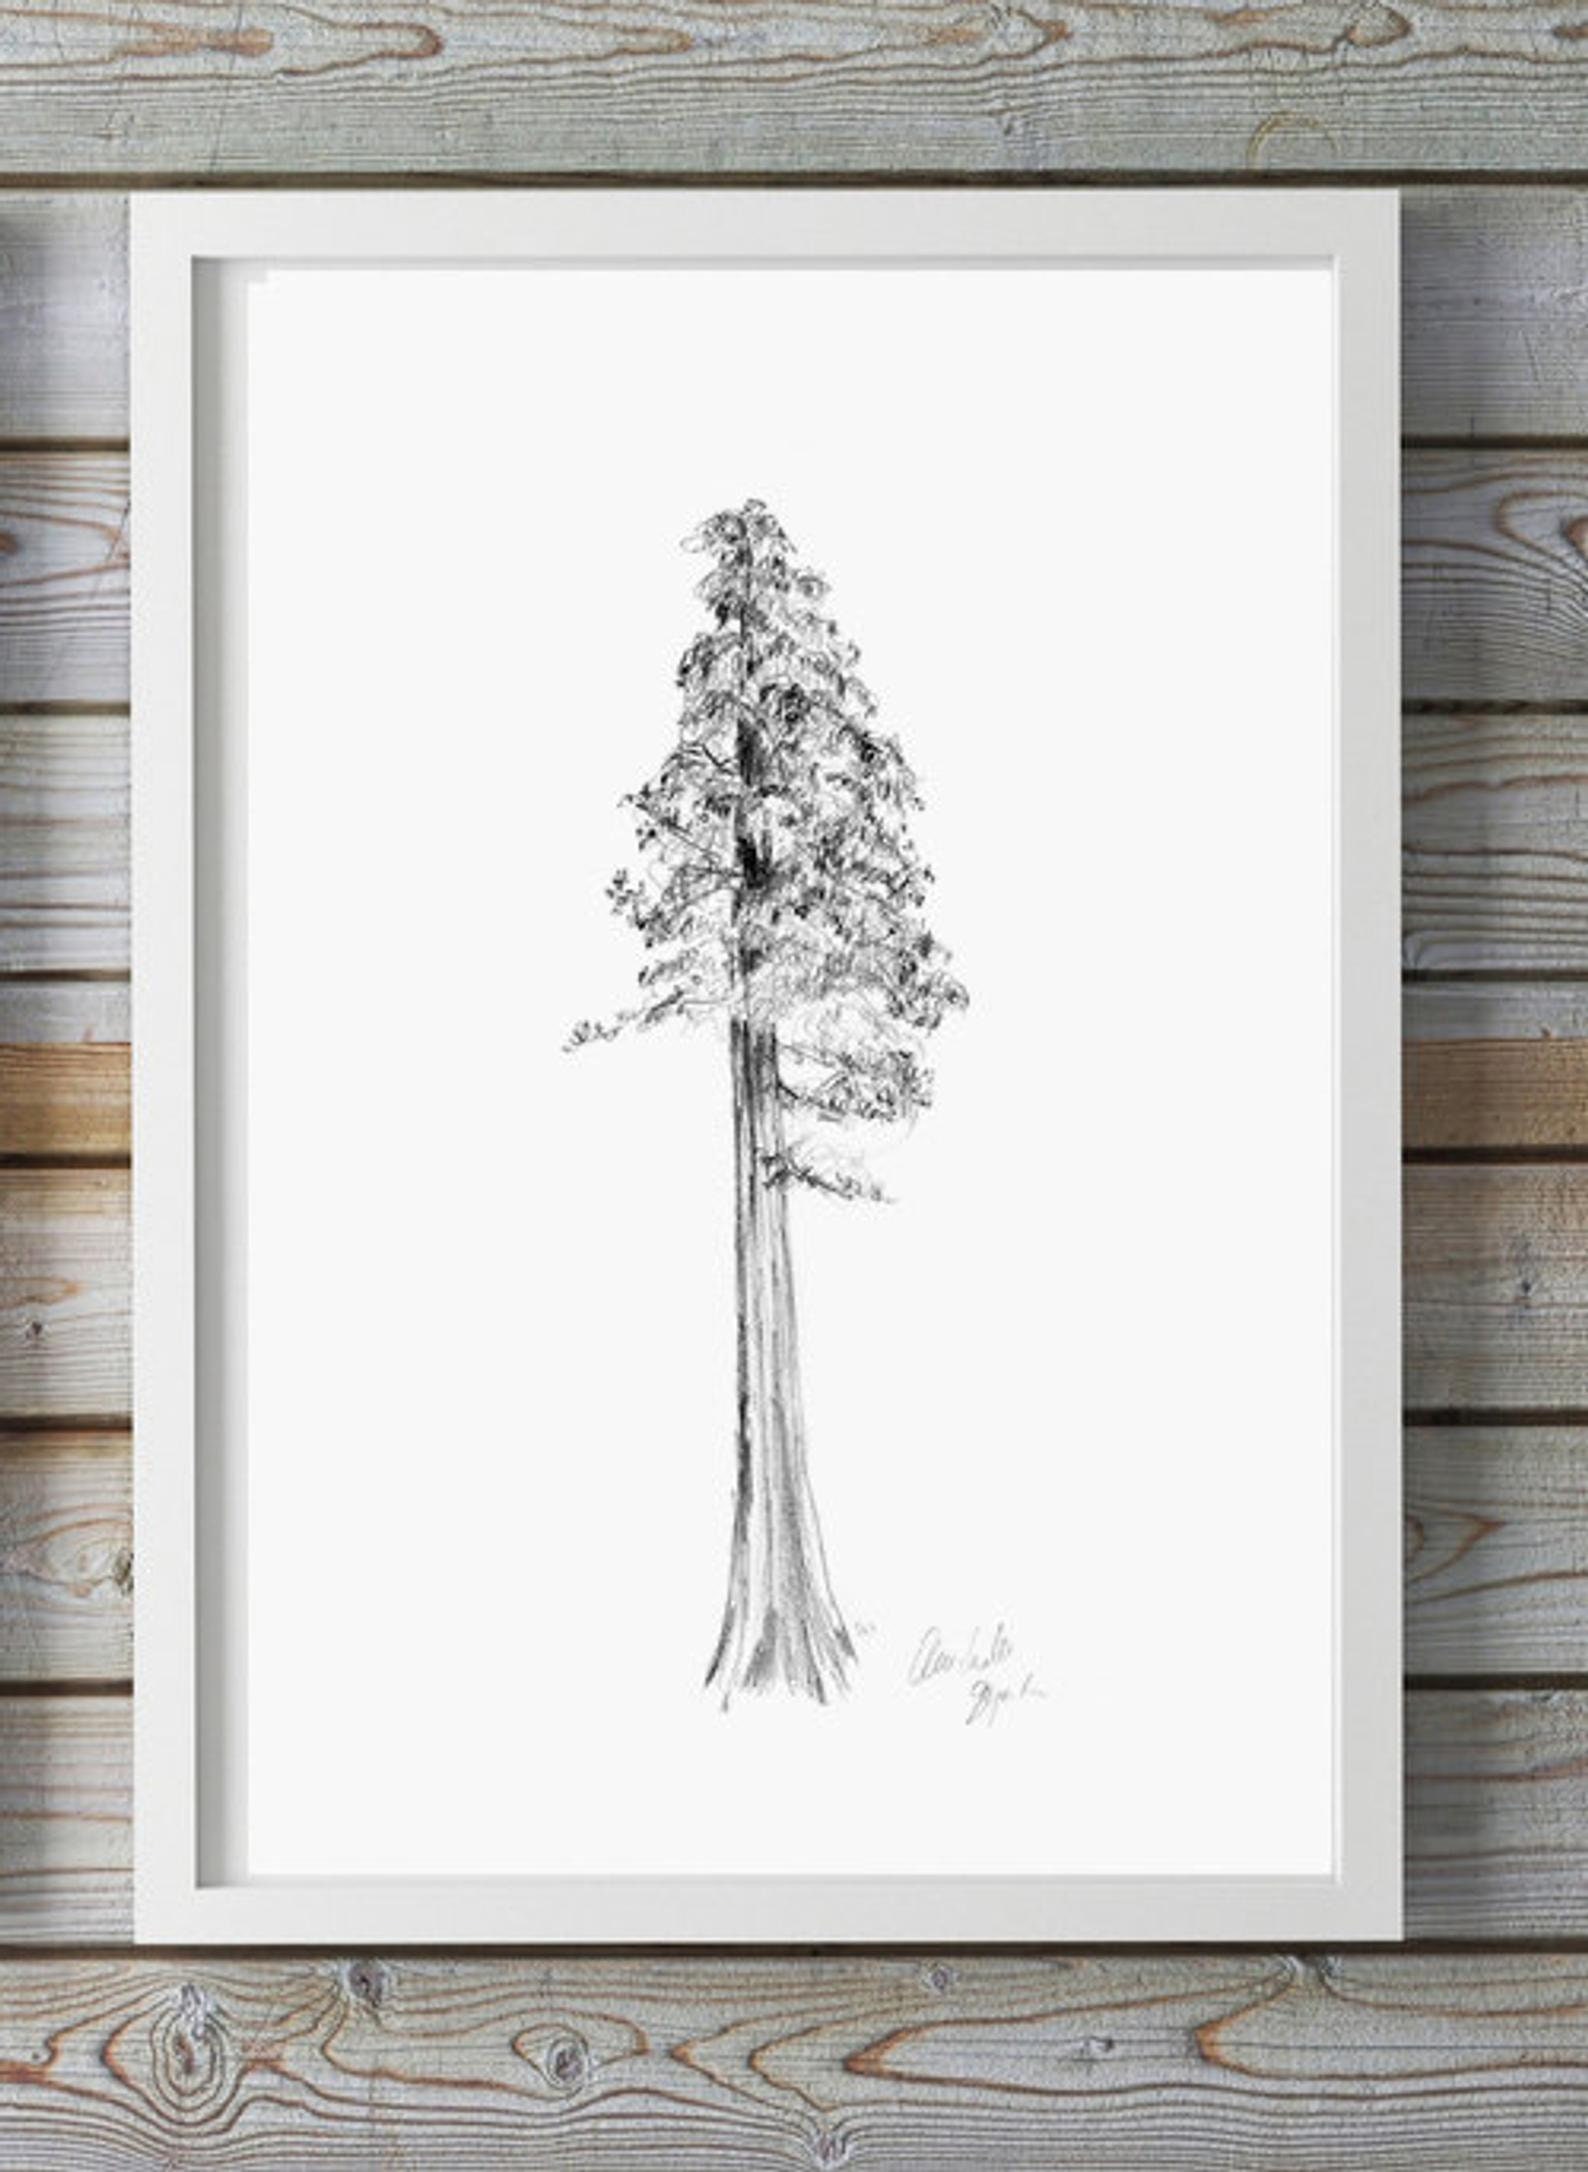 Giant Redwood Tree Watercolor Painting with a Minimalistic Style 29988585  Stock Photo at Vecteezy